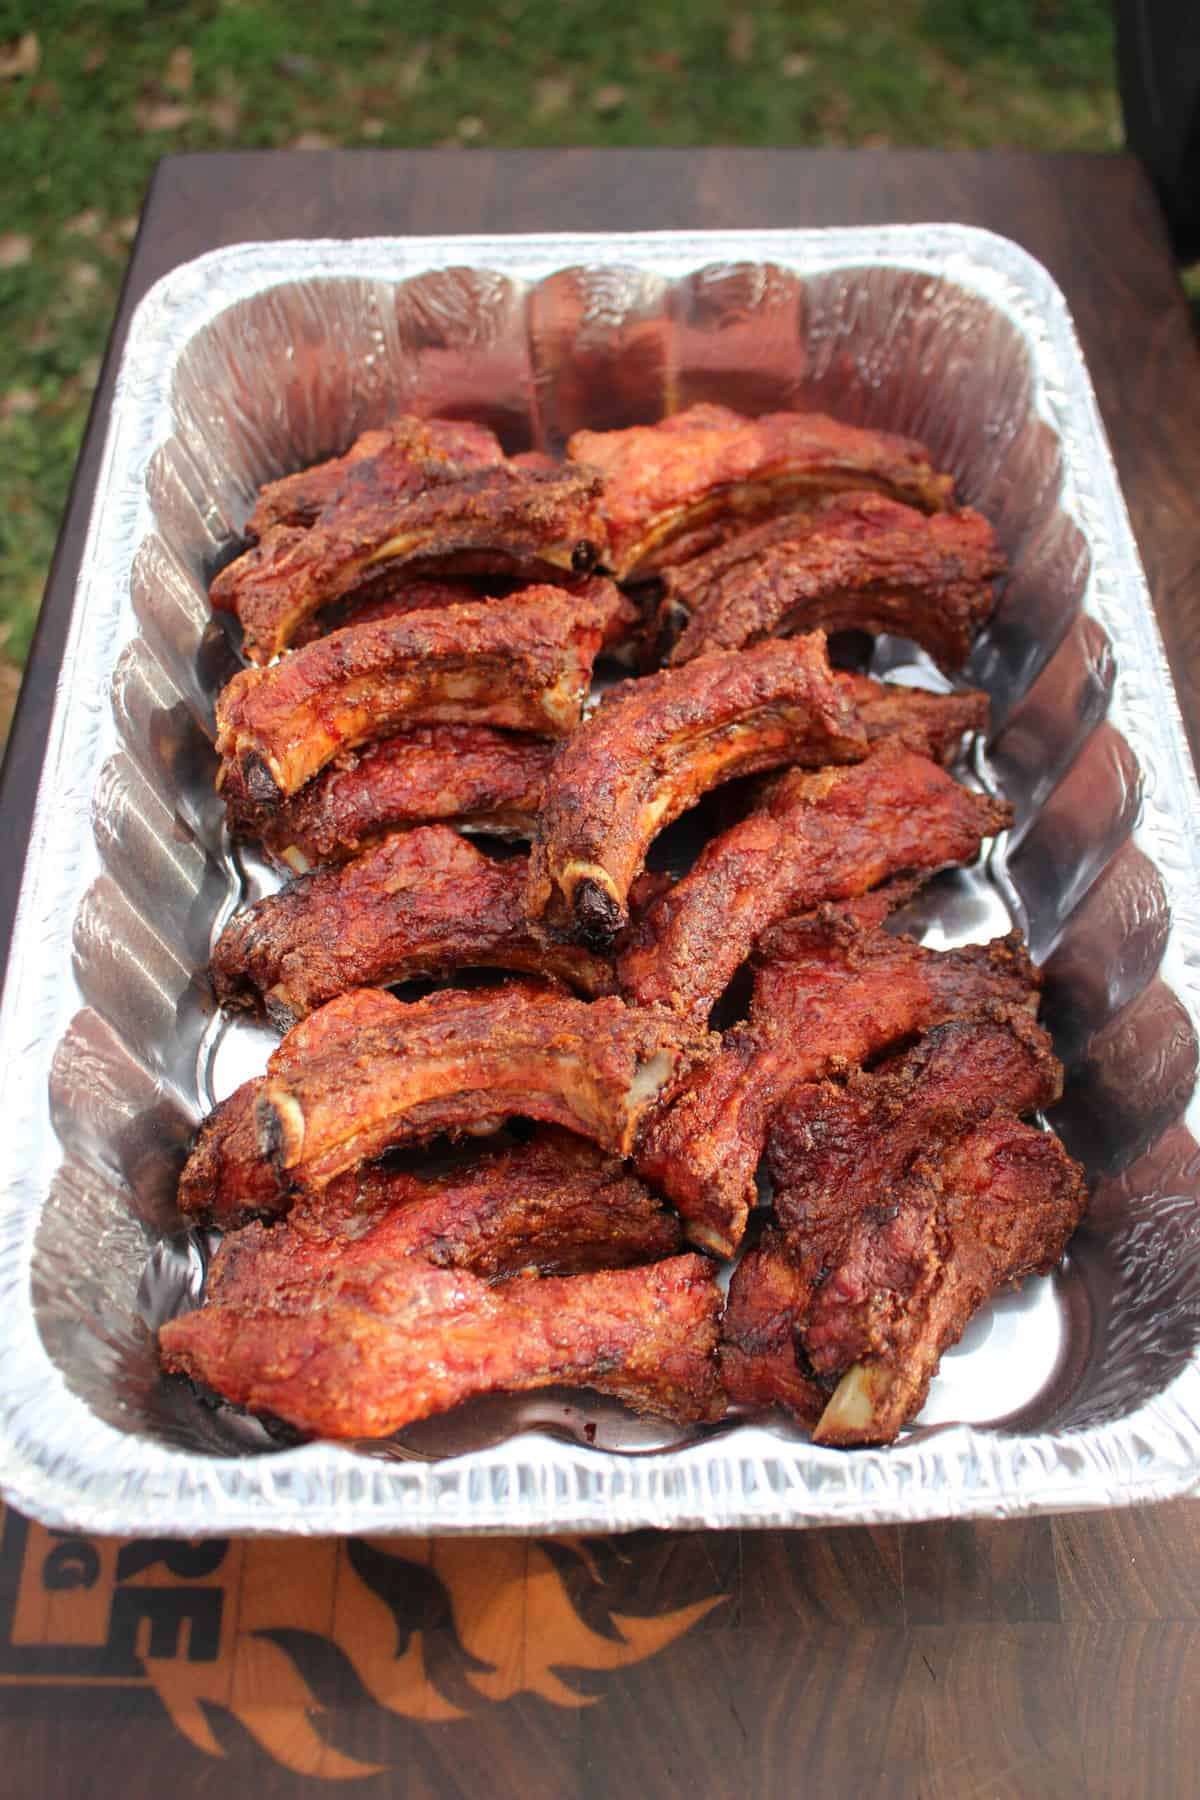 Smoked party ribs after the initial cooking stage.